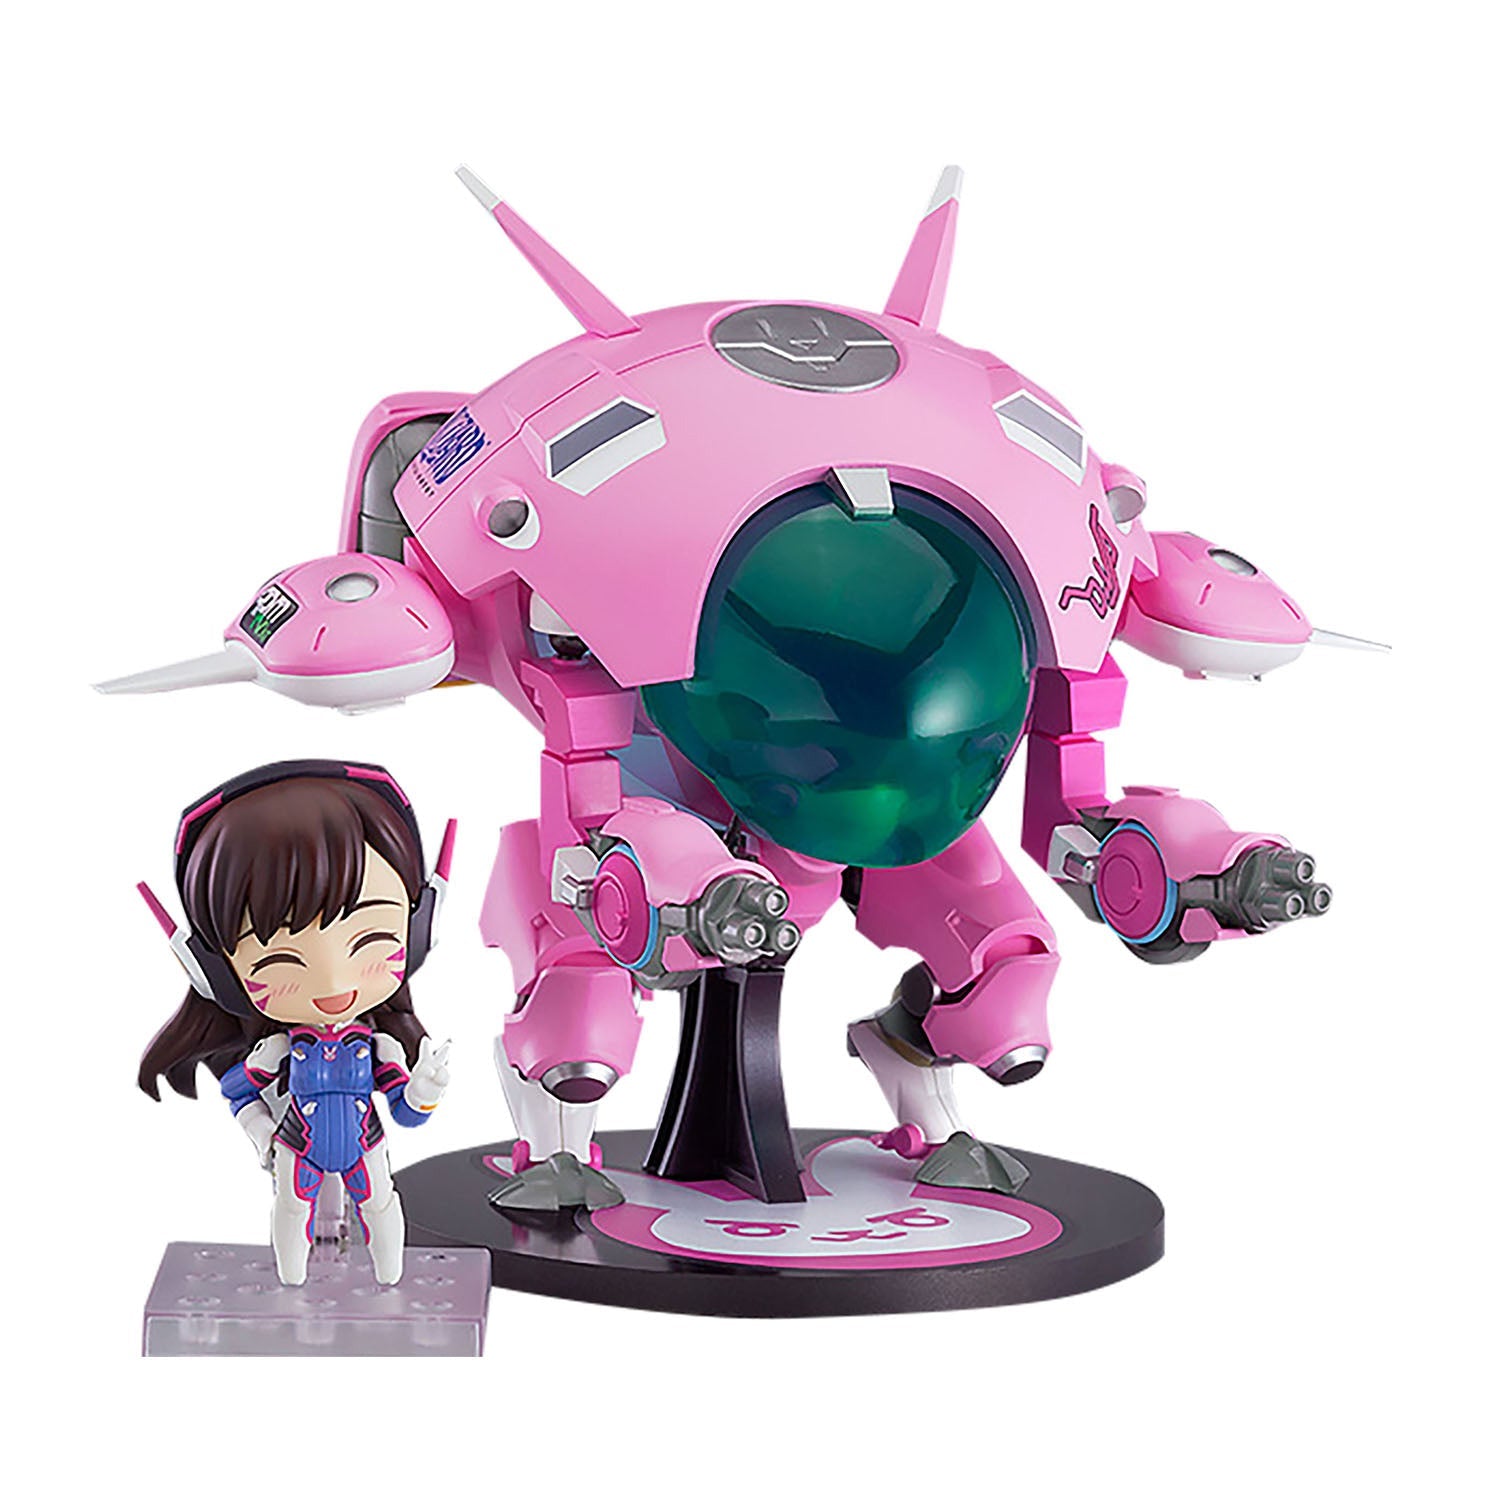 Overwatch Nendoroid Jumbo MEKA Classic Skin Edition in Pink - Front Right View